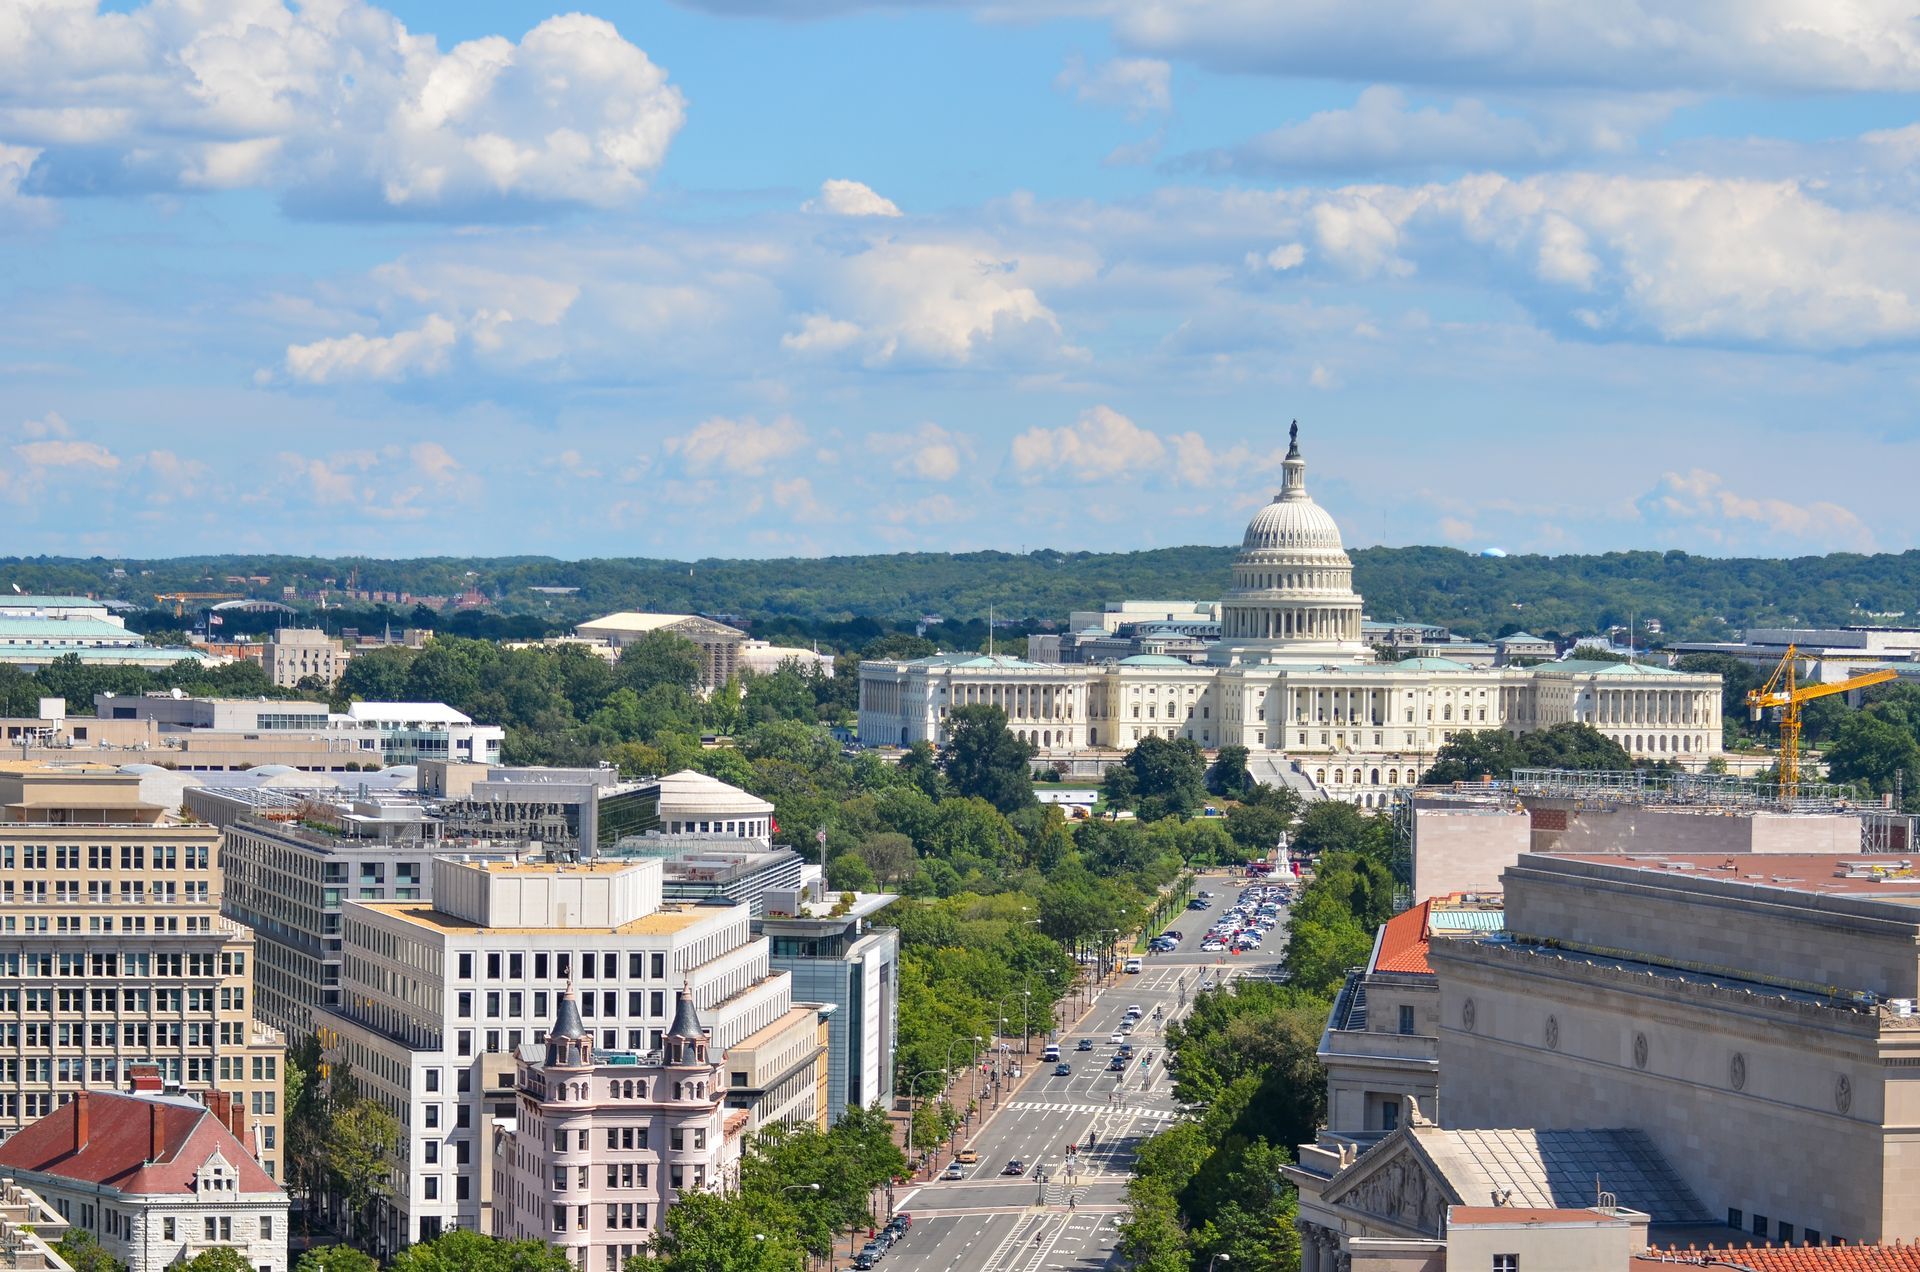 an aerial view of the capitol building in washington d.c.